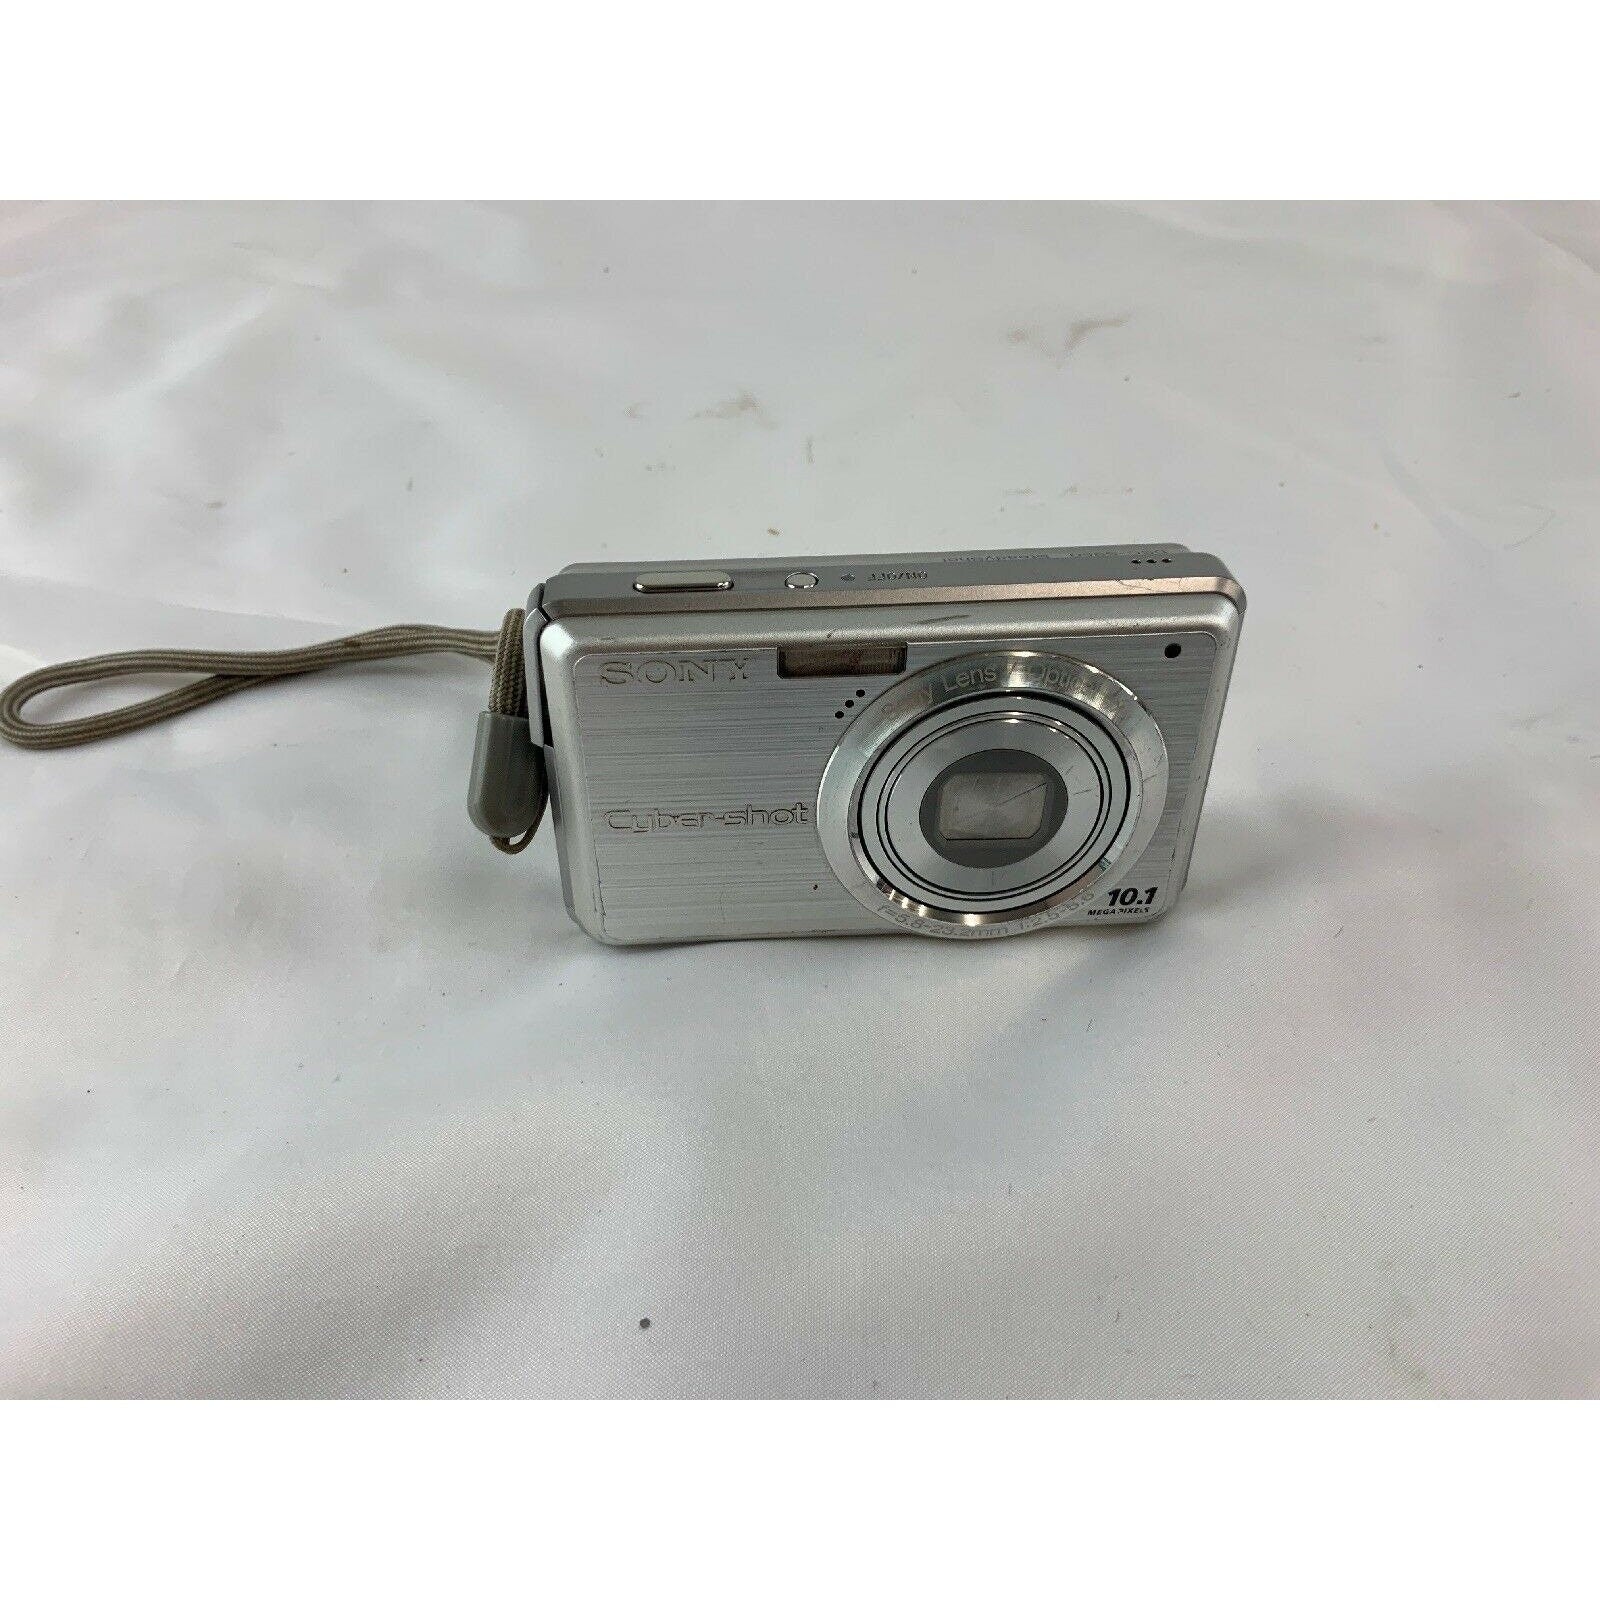 Sony Cybershot DSC-S950, Battery & Charger included